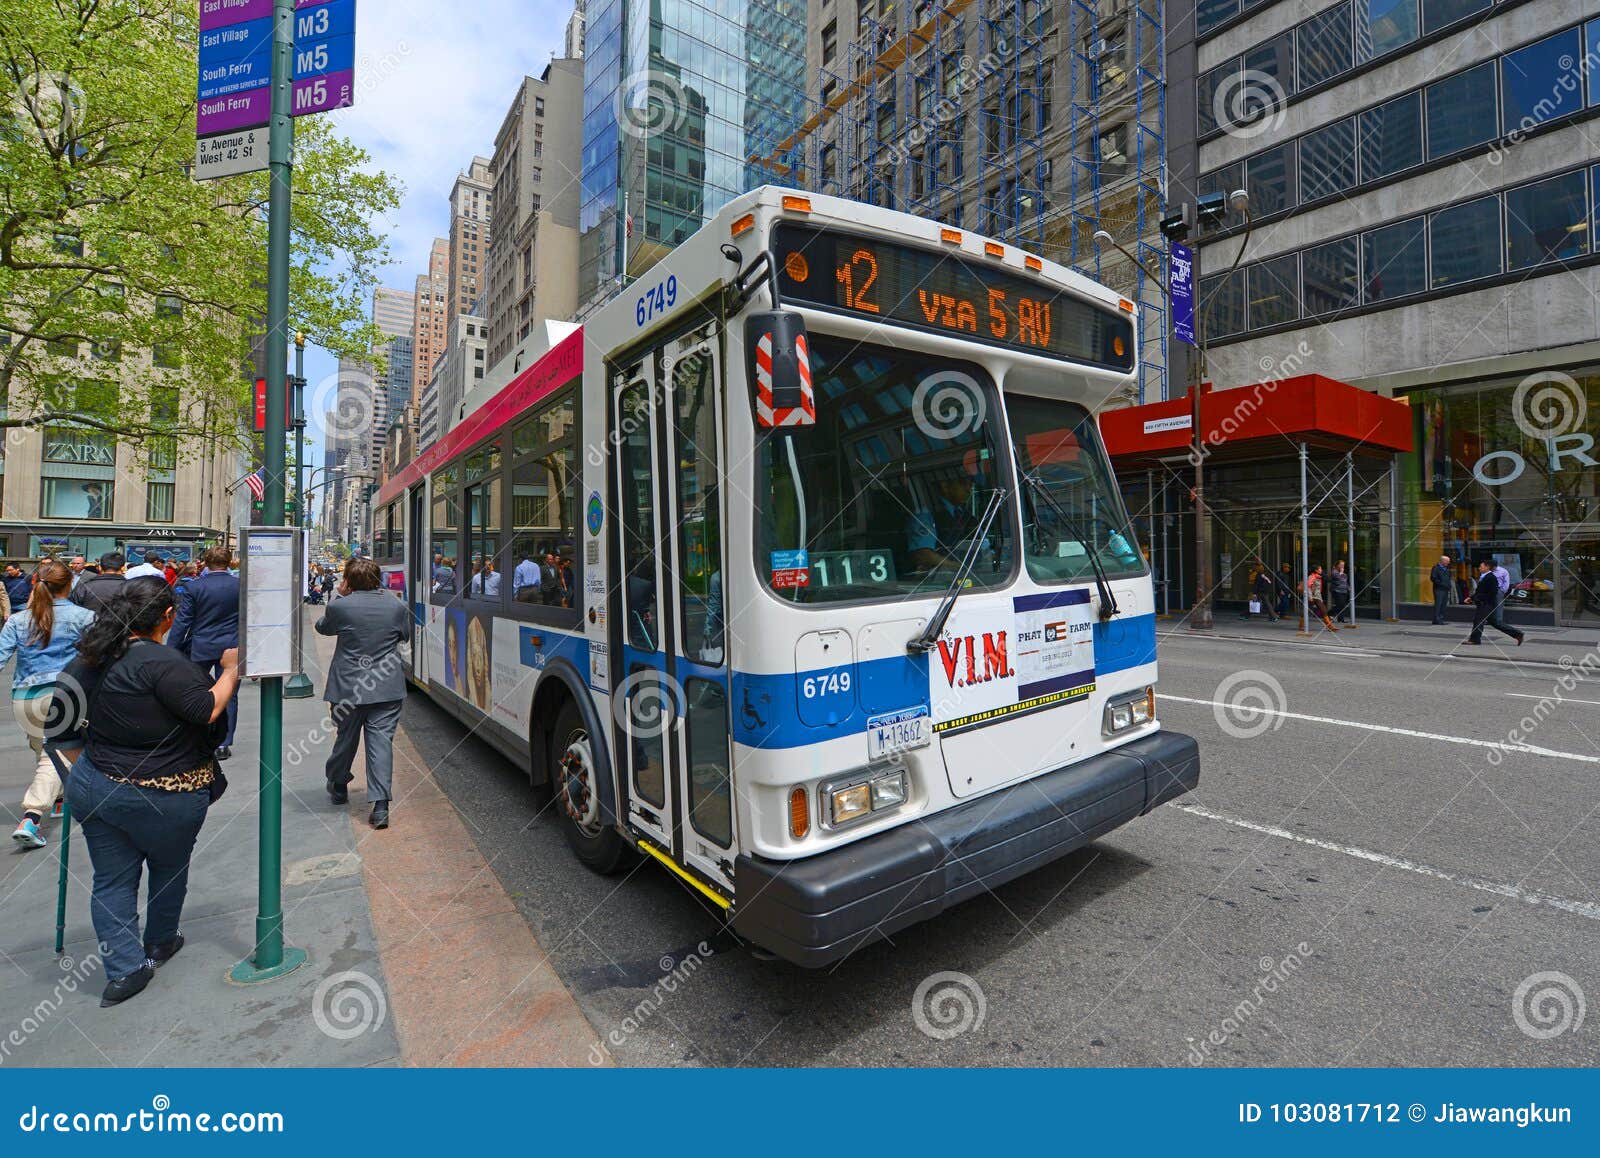 MTA Bus Route M2 on Fifth Ave, NYC, USA Editorial Photography - Image ...